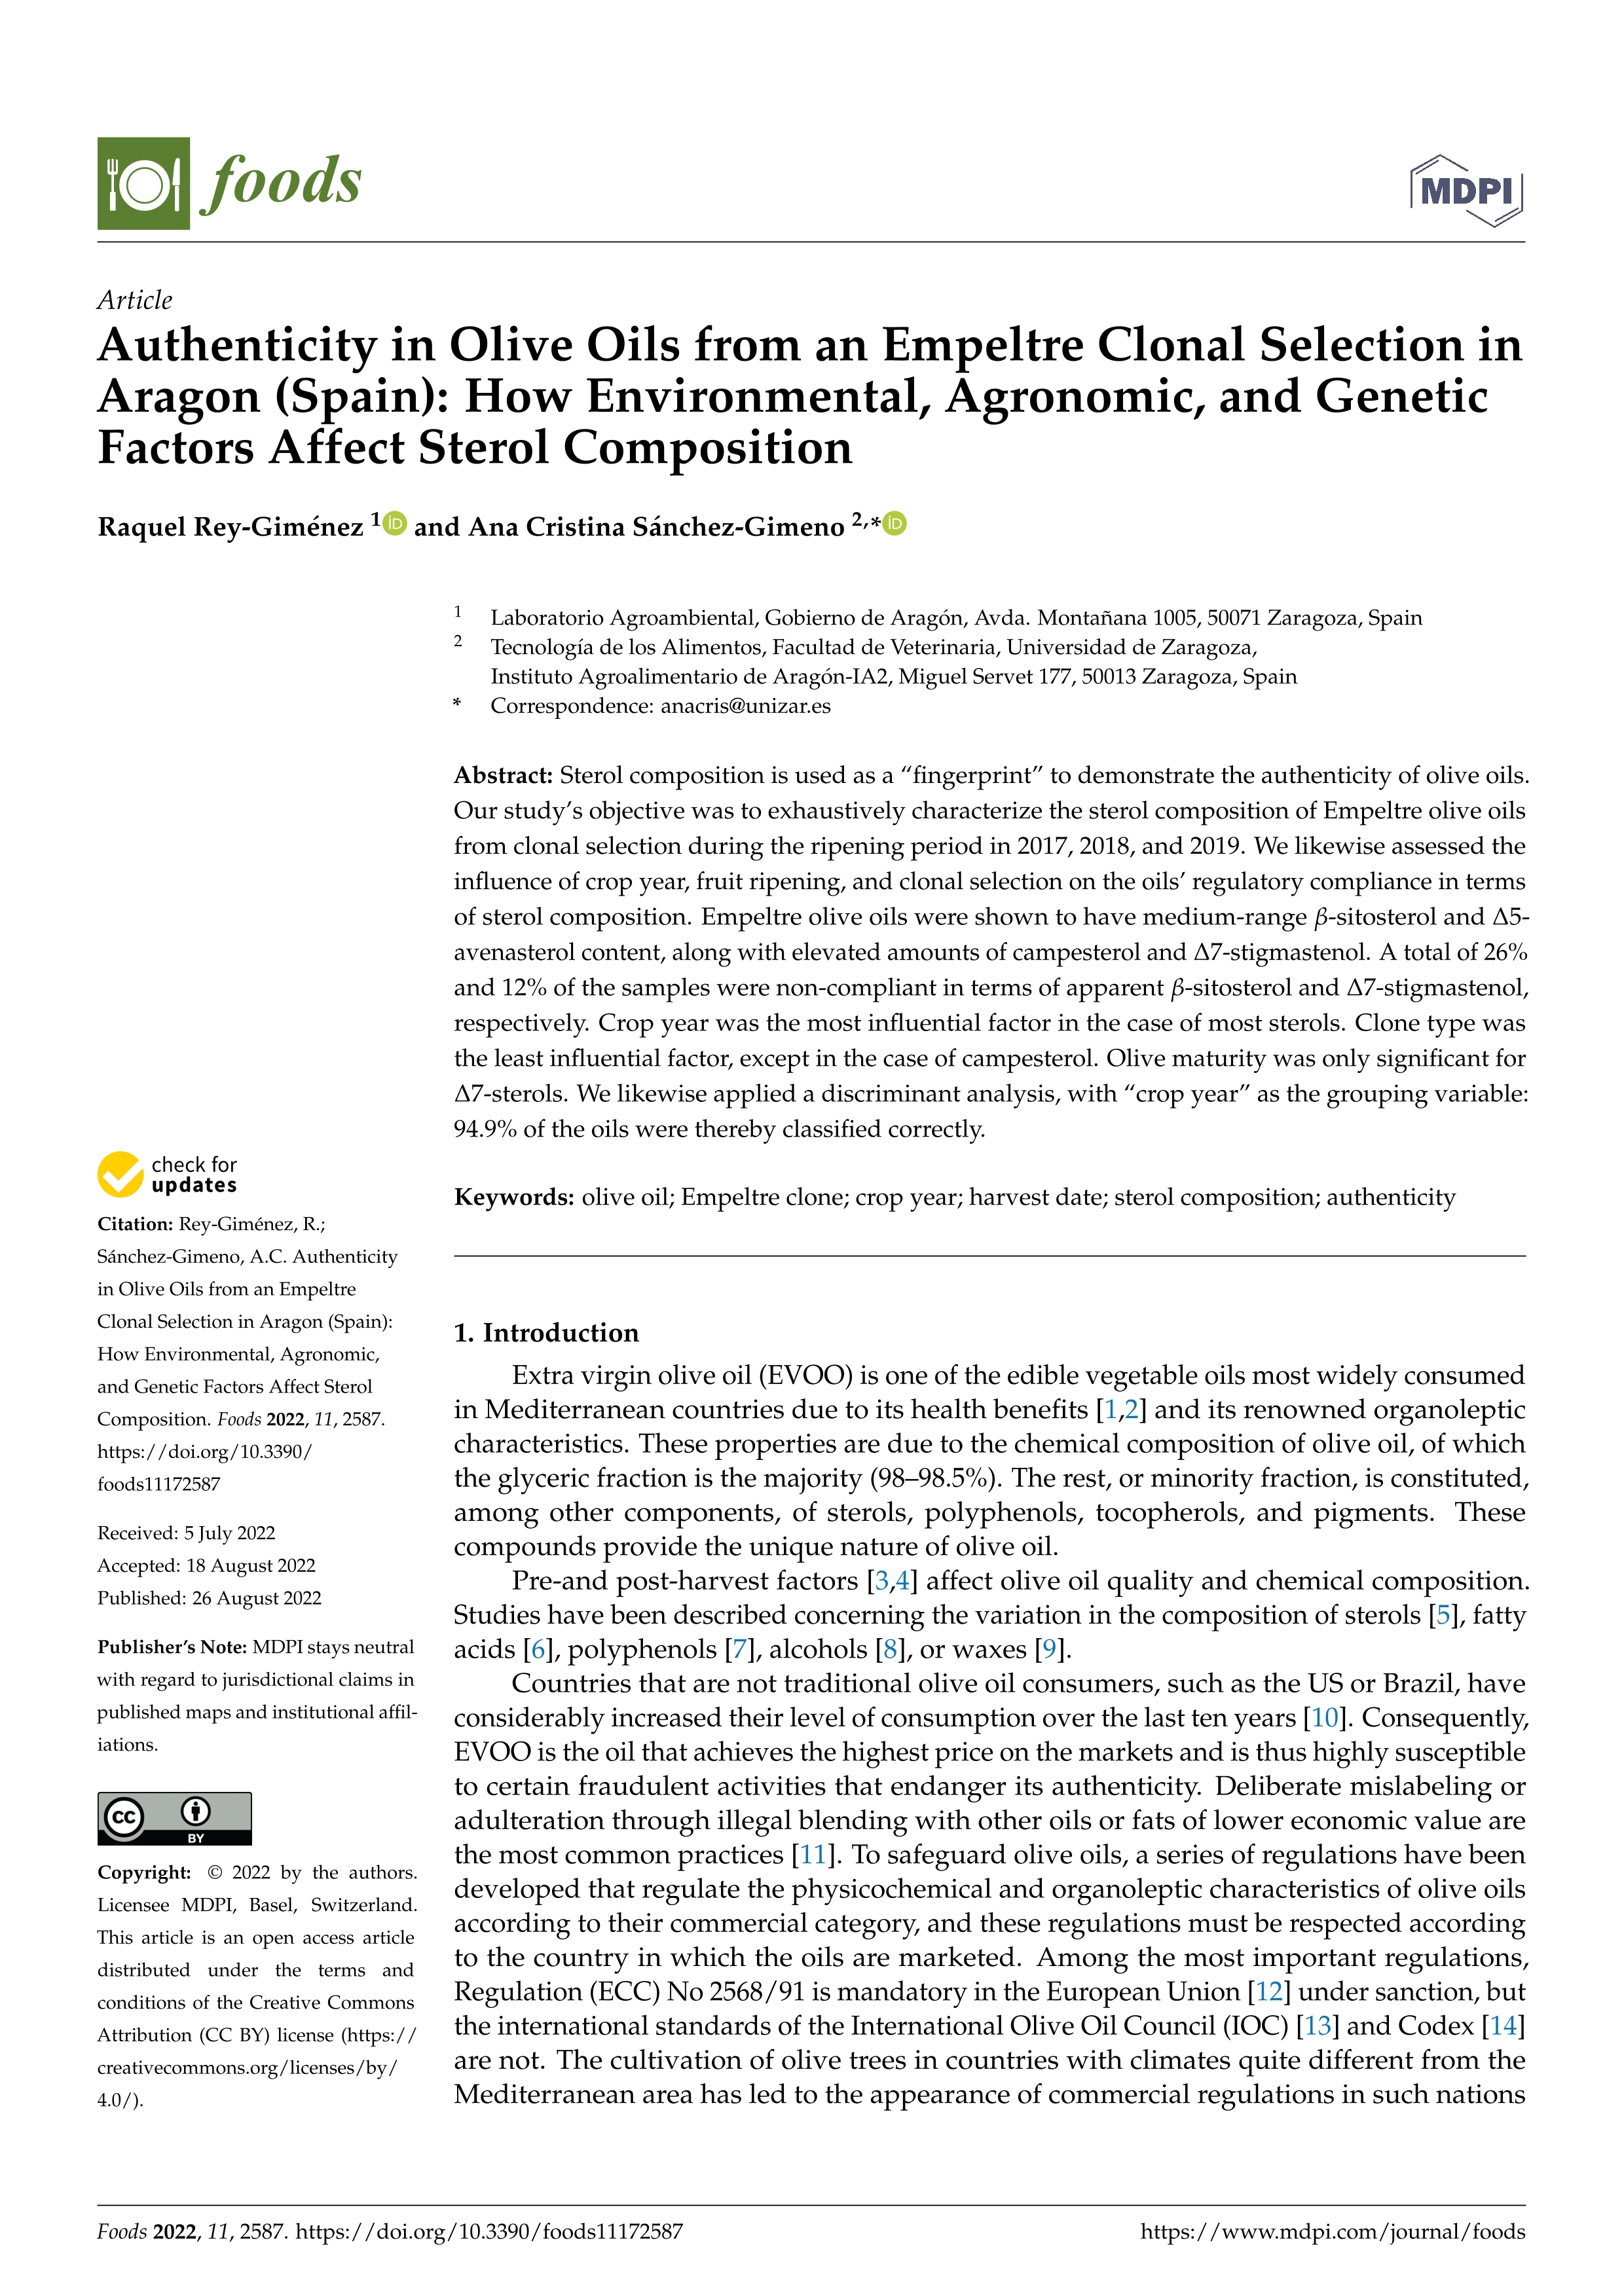 Authenticity in Olive Oils from an Empeltre Clonal Selection in Aragon (Spain): How Environmental, Agronomic, and Genetic Factors Affect Sterol Composition